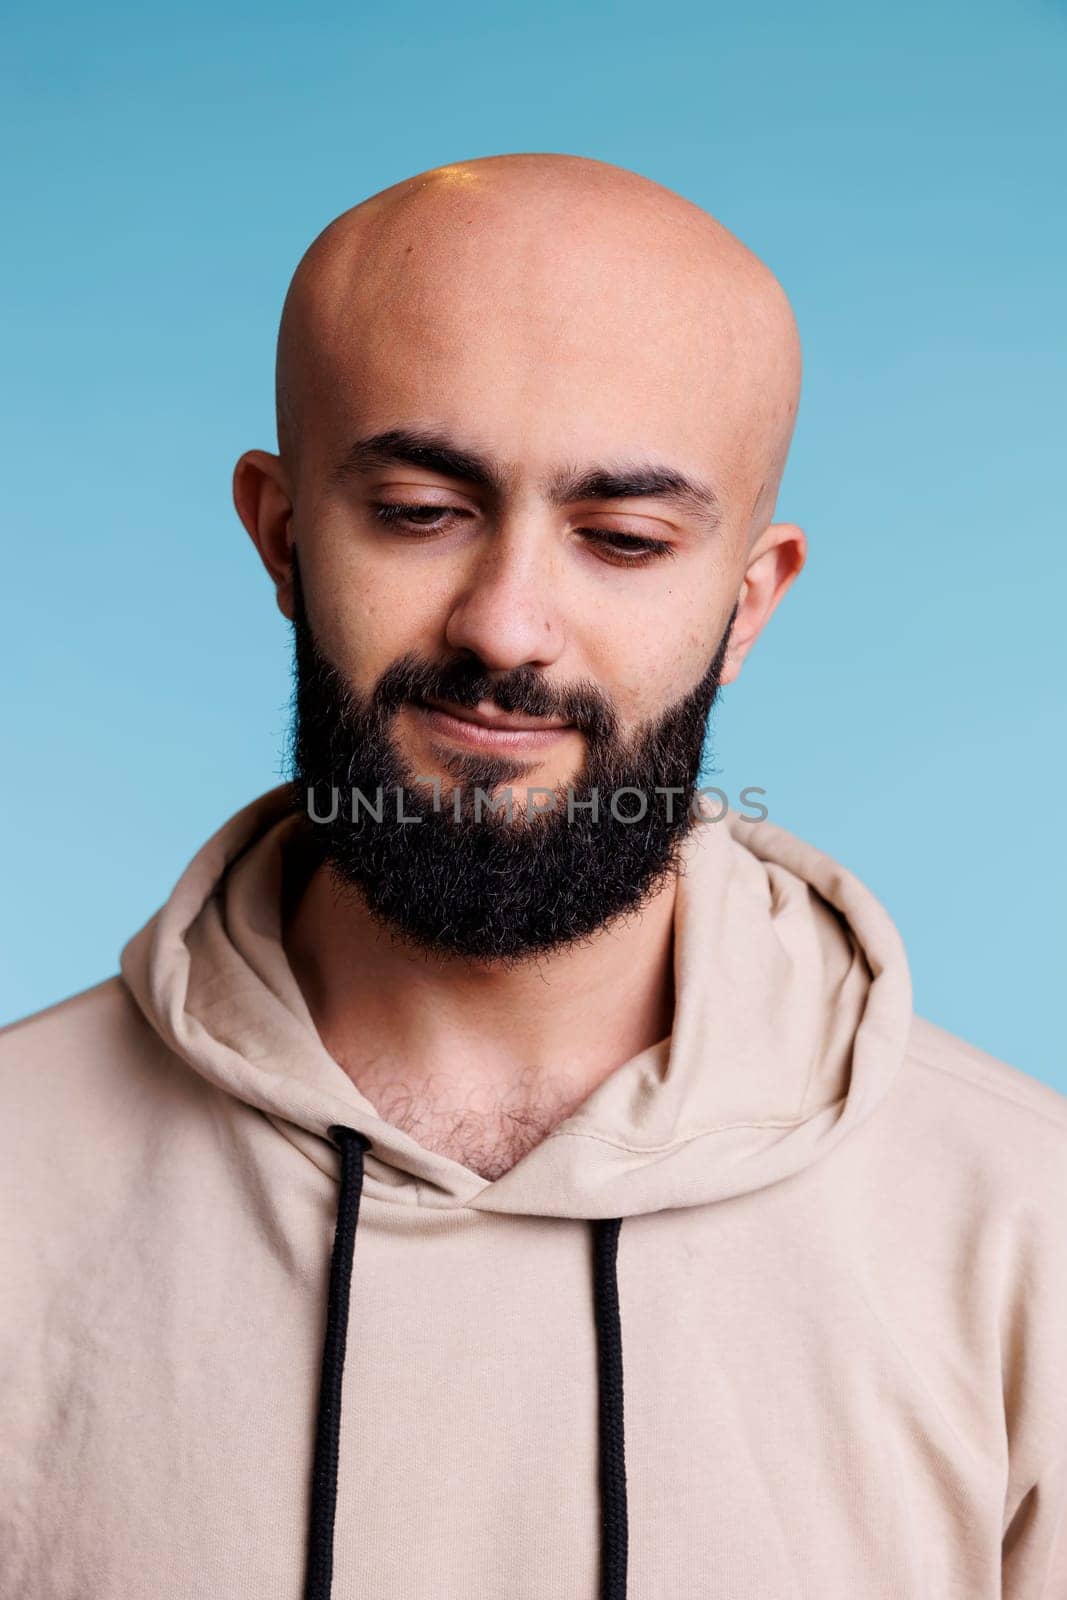 Young adult arab man looking down with thoughtful facial expression. Puzzled bald bearded person thinking, wearing casual beige hoodie and posing naturally on blue background